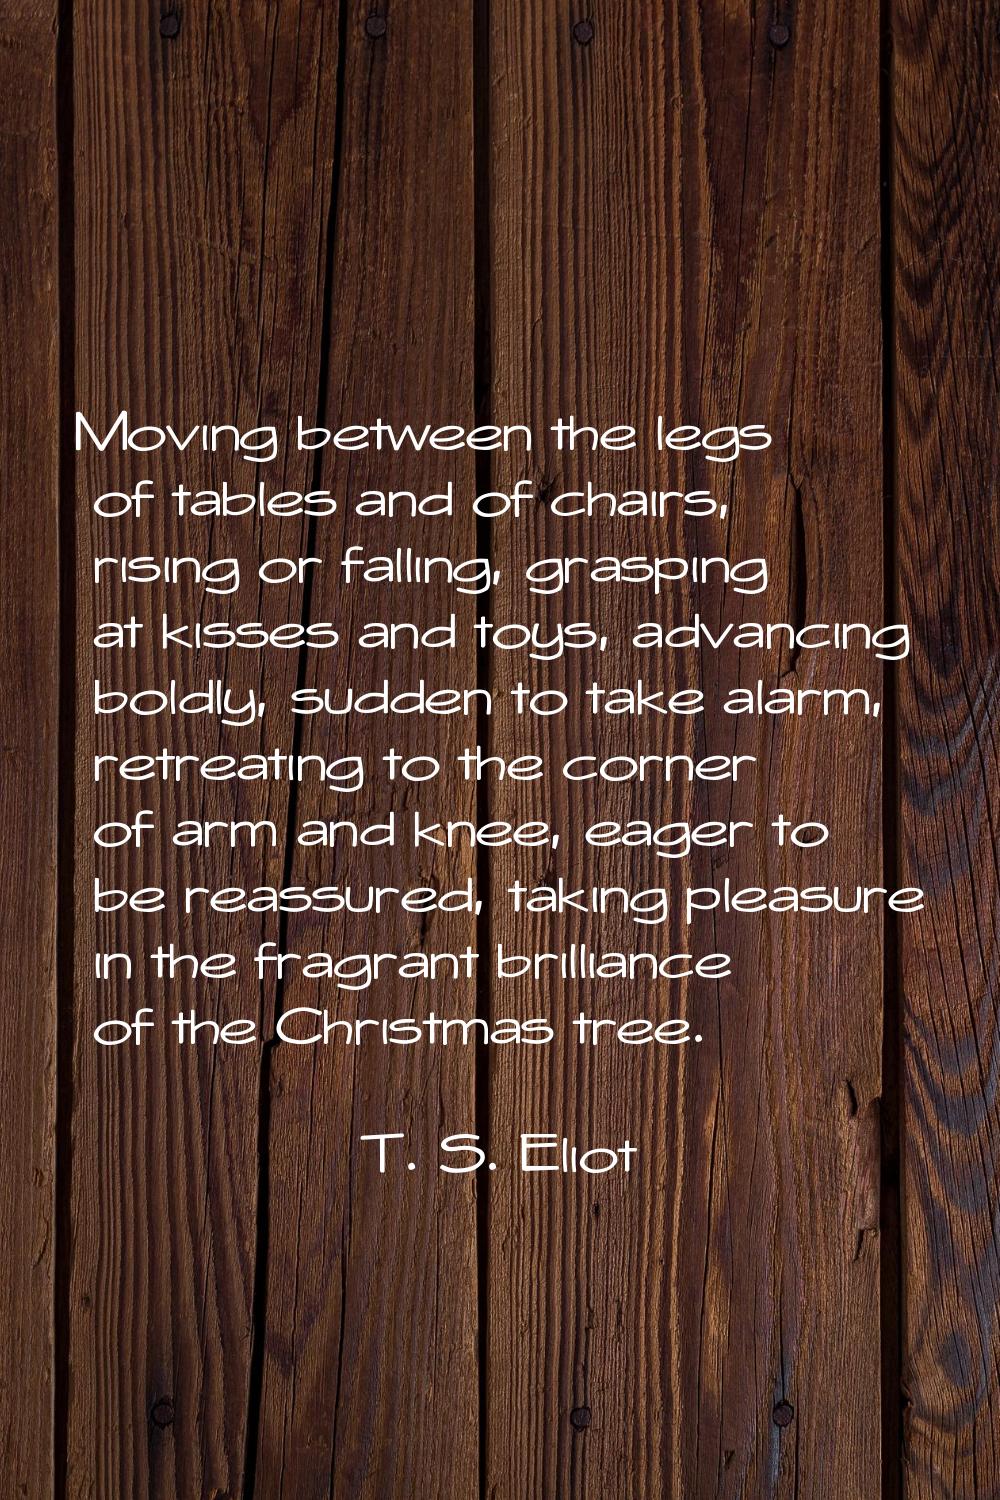 Moving between the legs of tables and of chairs, rising or falling, grasping at kisses and toys, ad